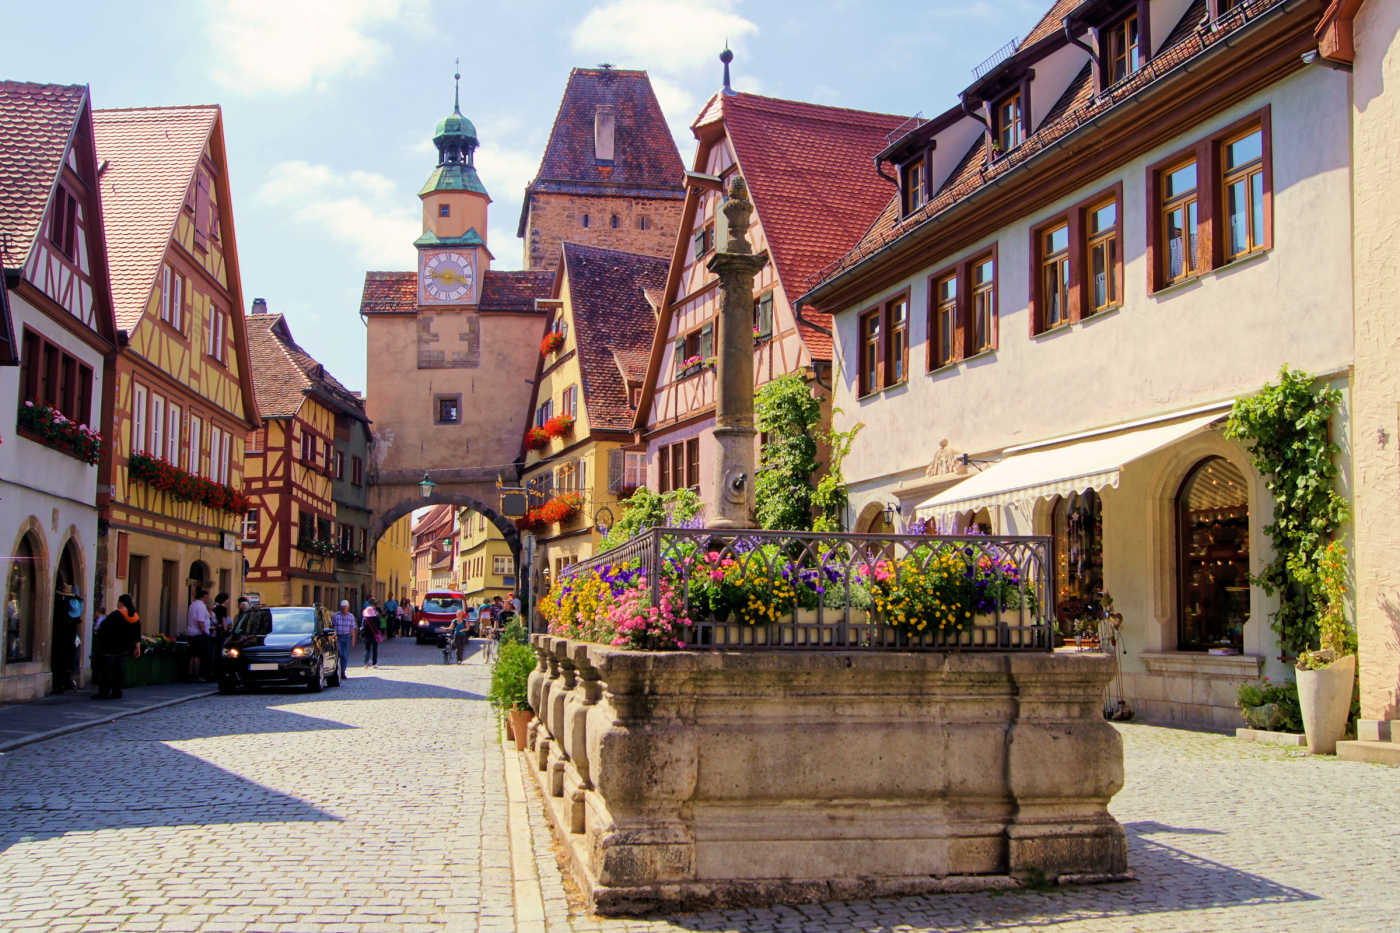 These Small Towns in Germany Look Straight Out of a Storybook